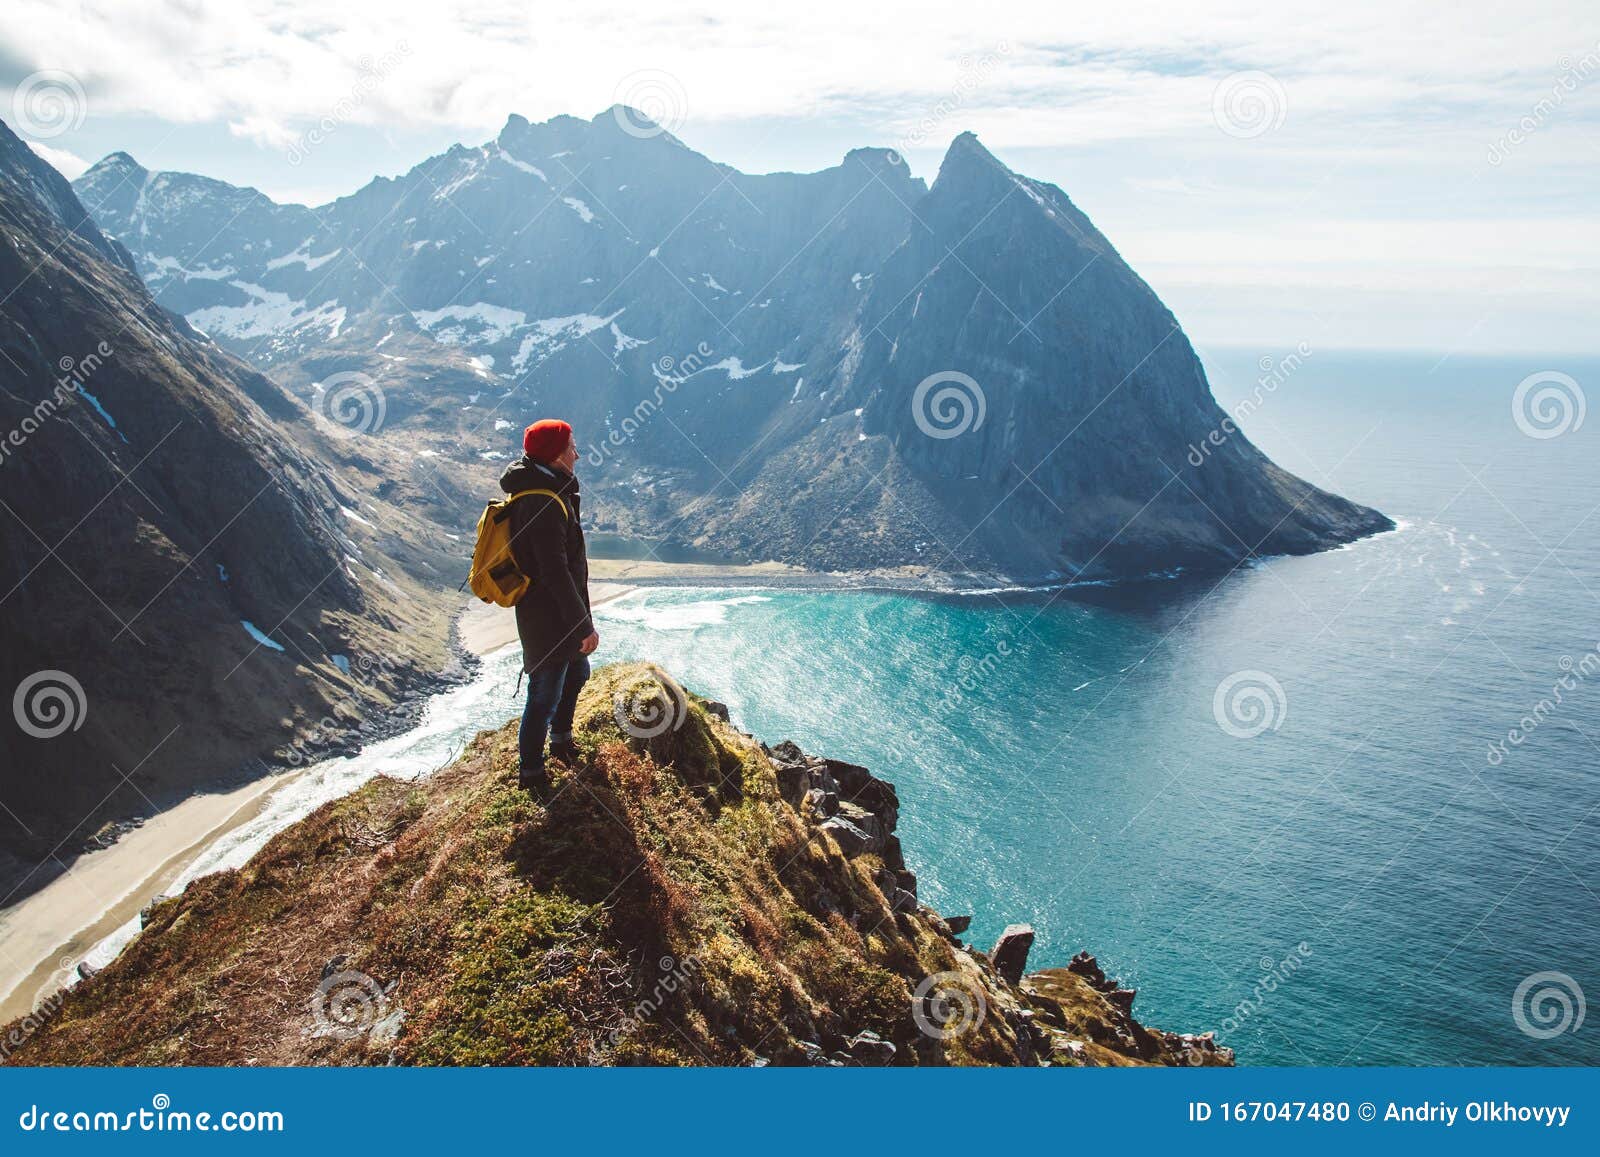 man stand on cliff edge alone enjoying aerial view backpacking lifestyle travel adventure outdoor vacations